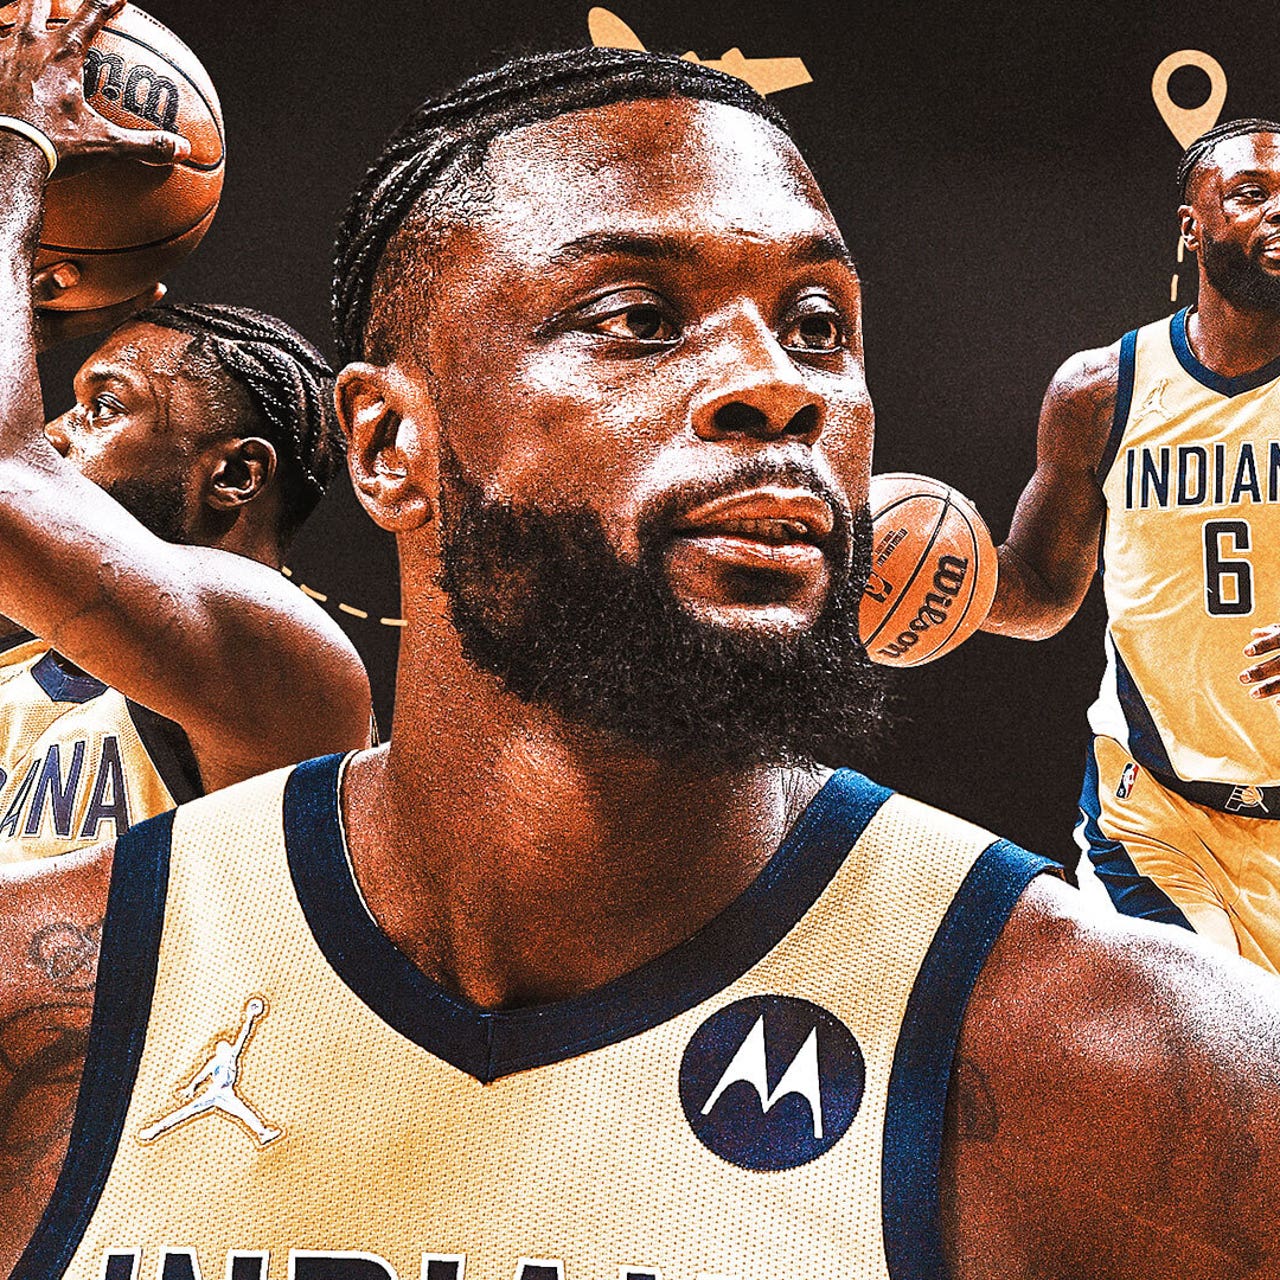 Lance Stephenson relishing second chance in return with Pacers